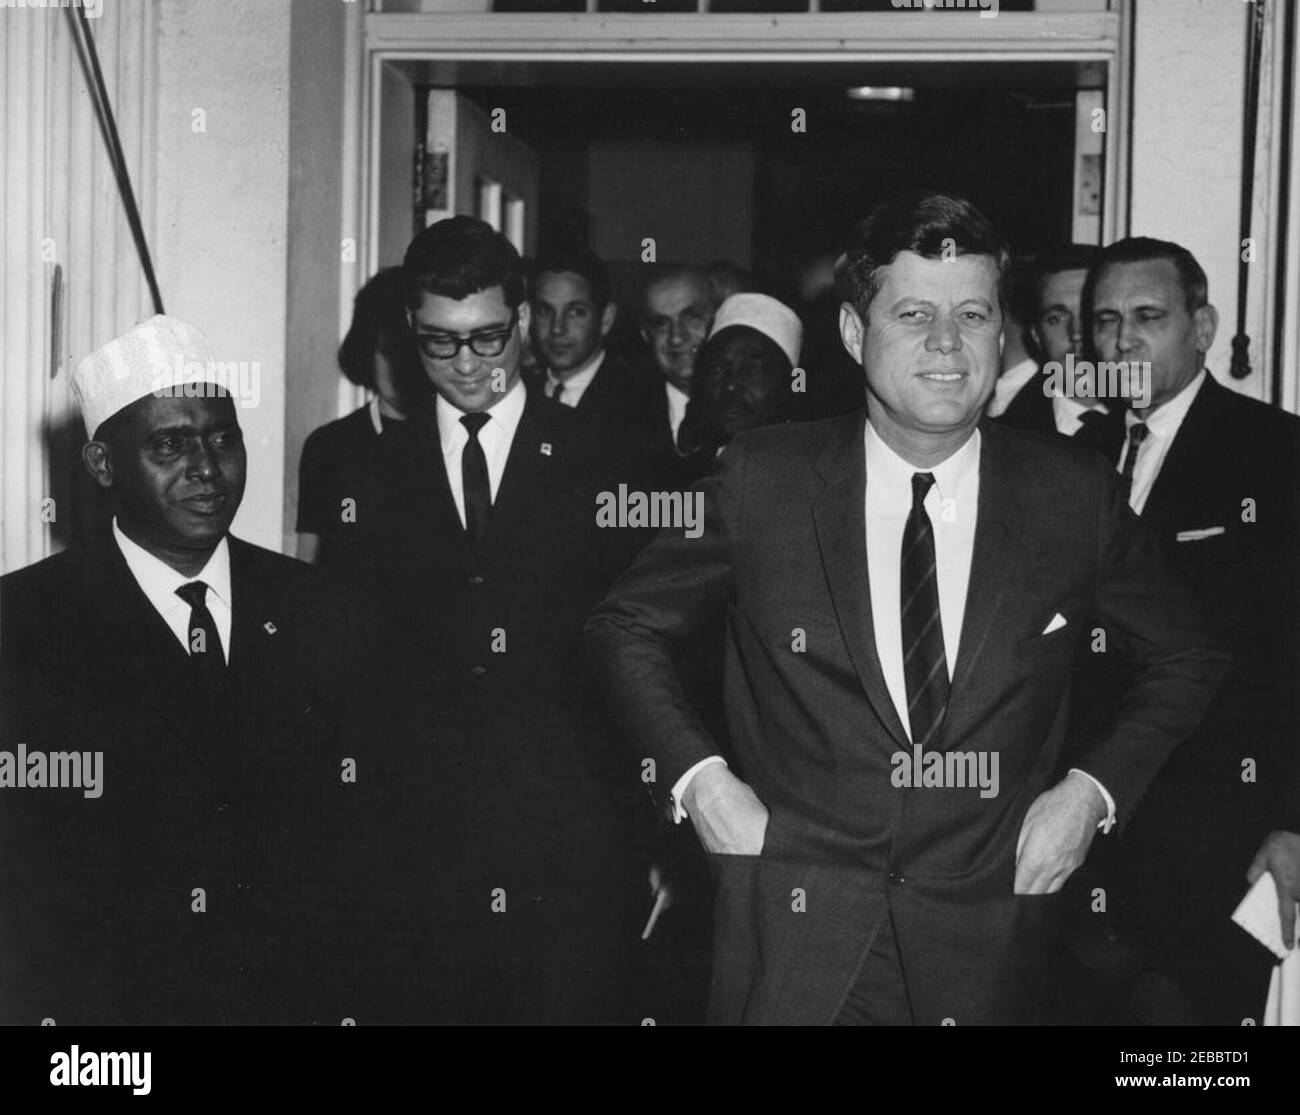 Meeting with Abdirashid Ali Shermarke, Prime Minister of the Somali Republic, 4:00PM. President John F. Kennedy and Prime Minister of the Somali Republic, Dr. Abdirashid Ali Shermarke (left), exit the White House following a meeting. Also pictured: U.S. State Department interpreter, Neil Seidenman; U.S. Deputy Assistant Secretary of State for African Affairs, Henry J. Tasca; White House Secret Service agent, Jerry Blaine. West Wing Entrance, White House, Washington, D.C. Stock Photo